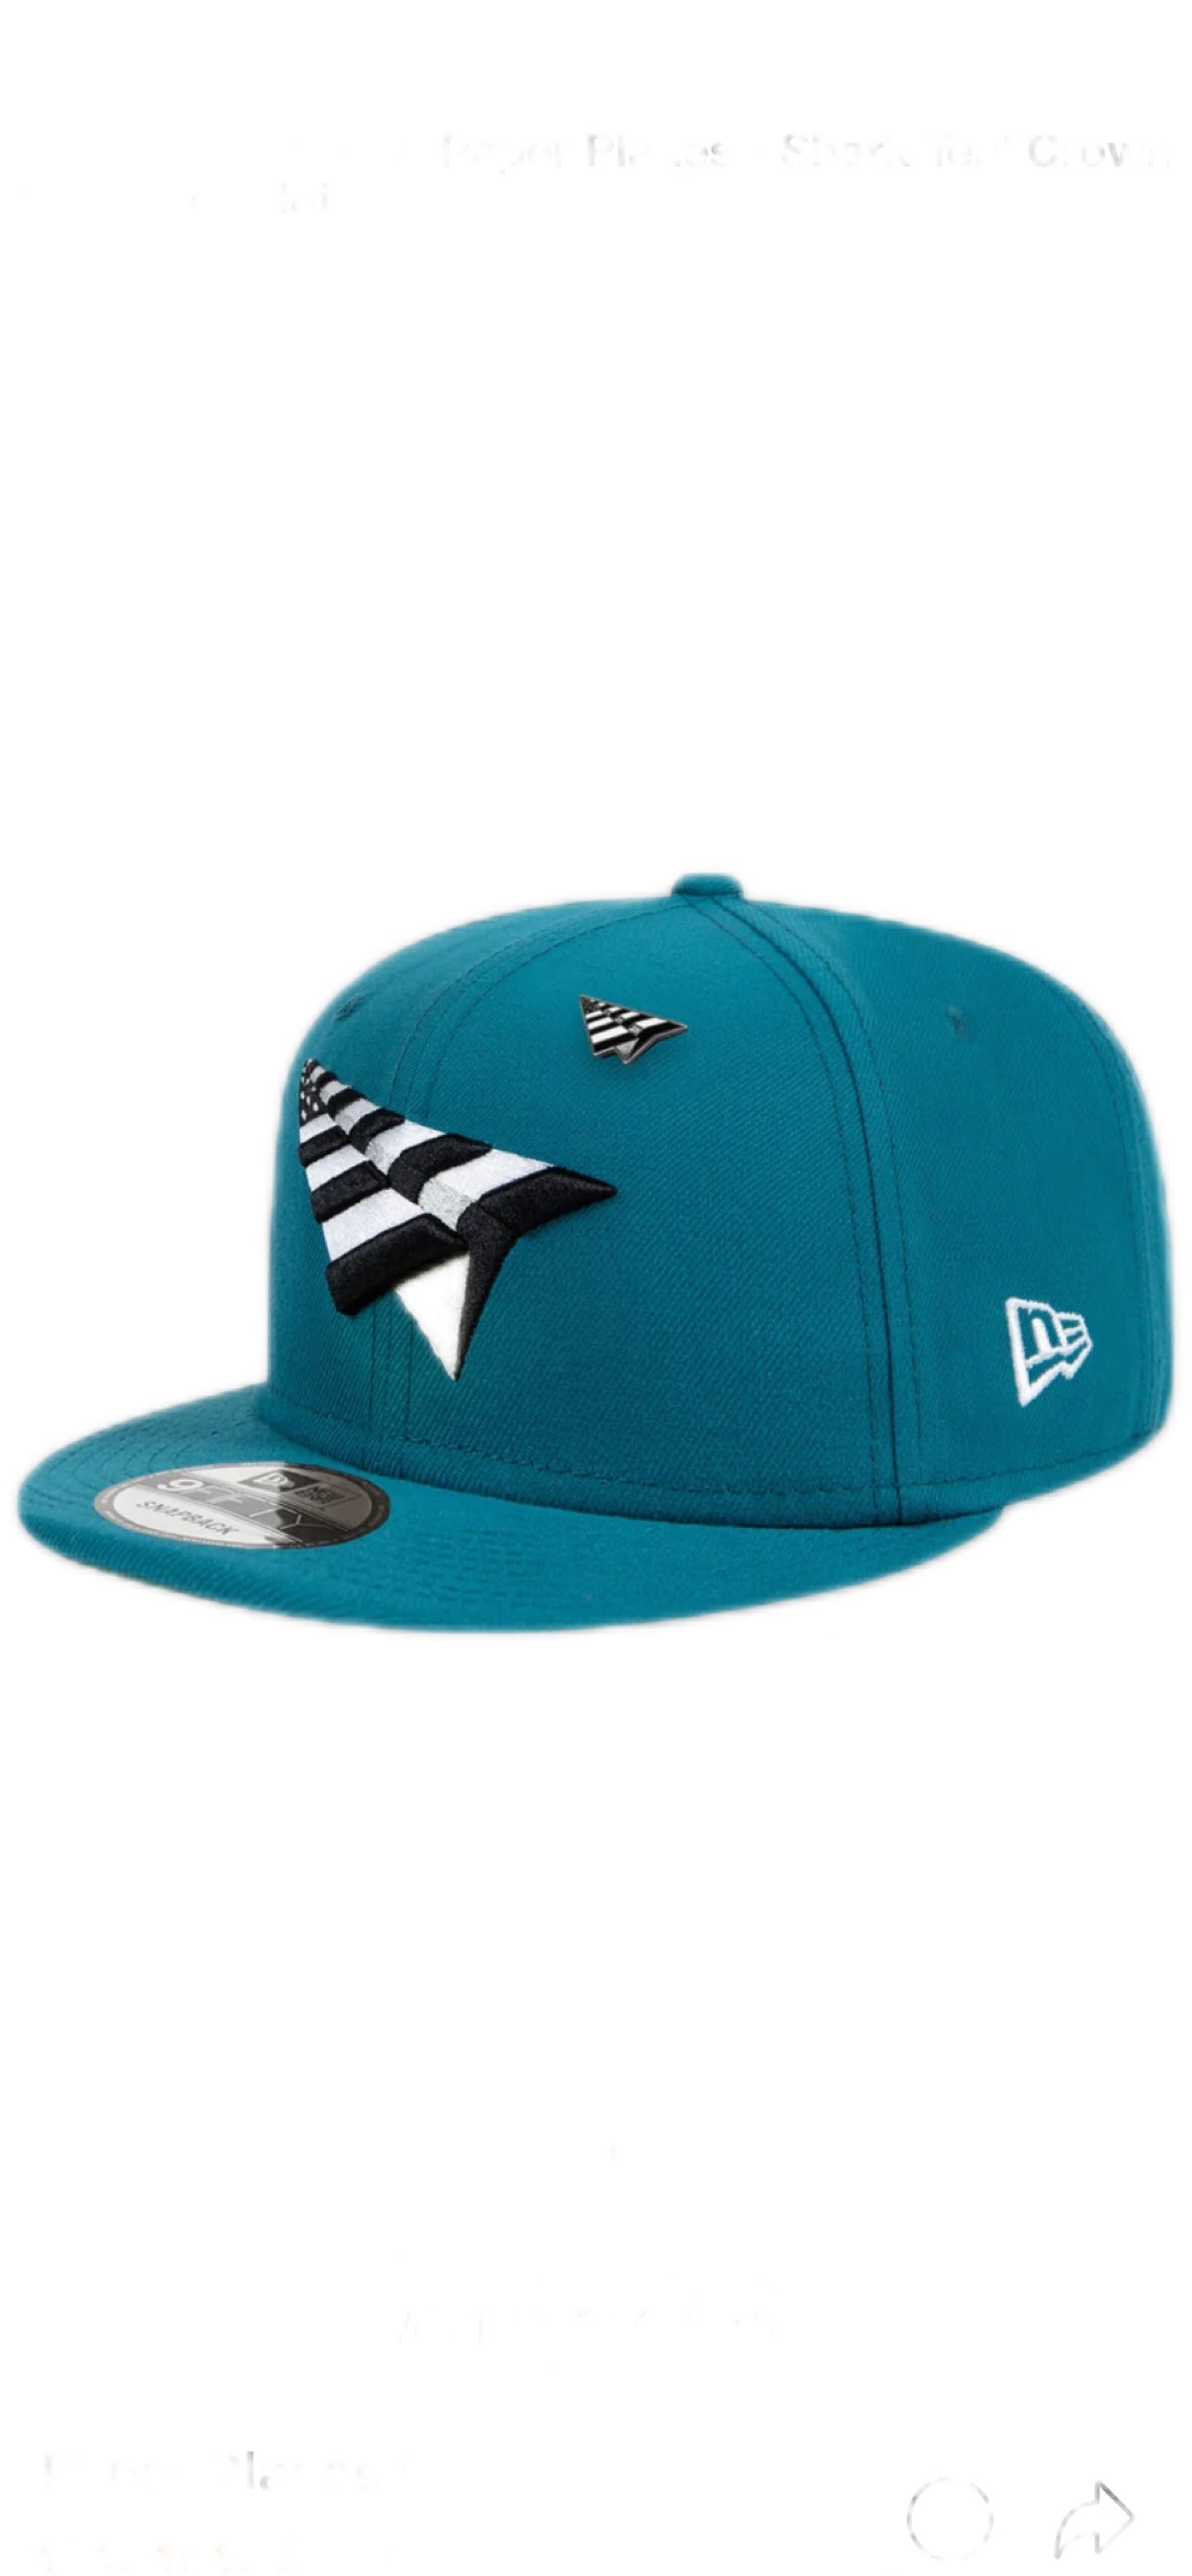 PAPER PLANES CLASSIC 9FIFTY (TEAL) CROWN SNAPBACK